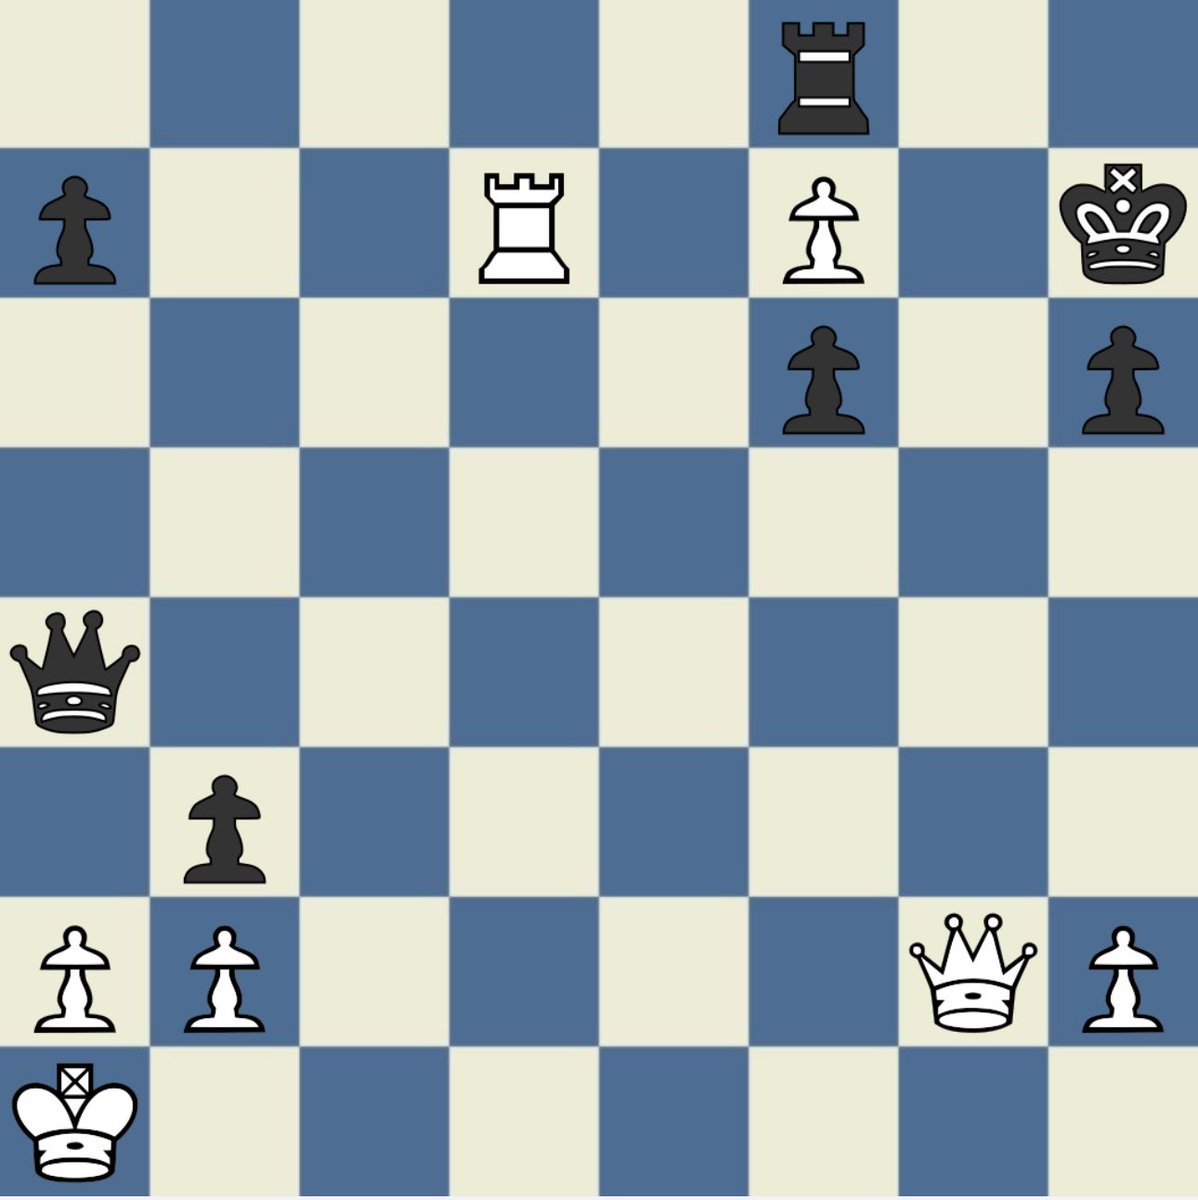 White to play: mate in three.